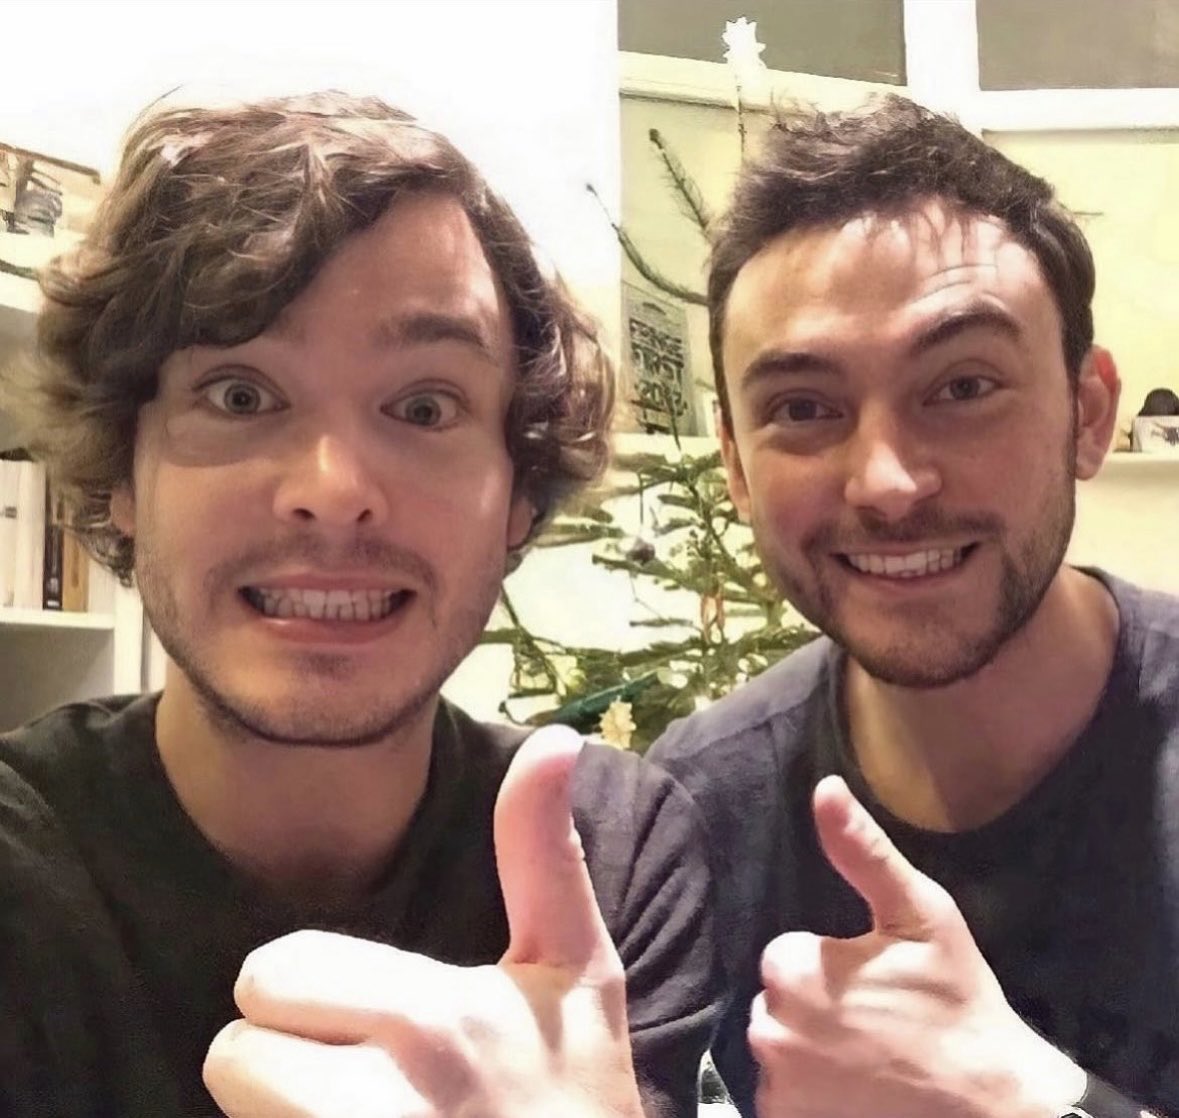 #Fun #pic of #GeorgeBlagden and #AlexVlahos from #Versailles days!